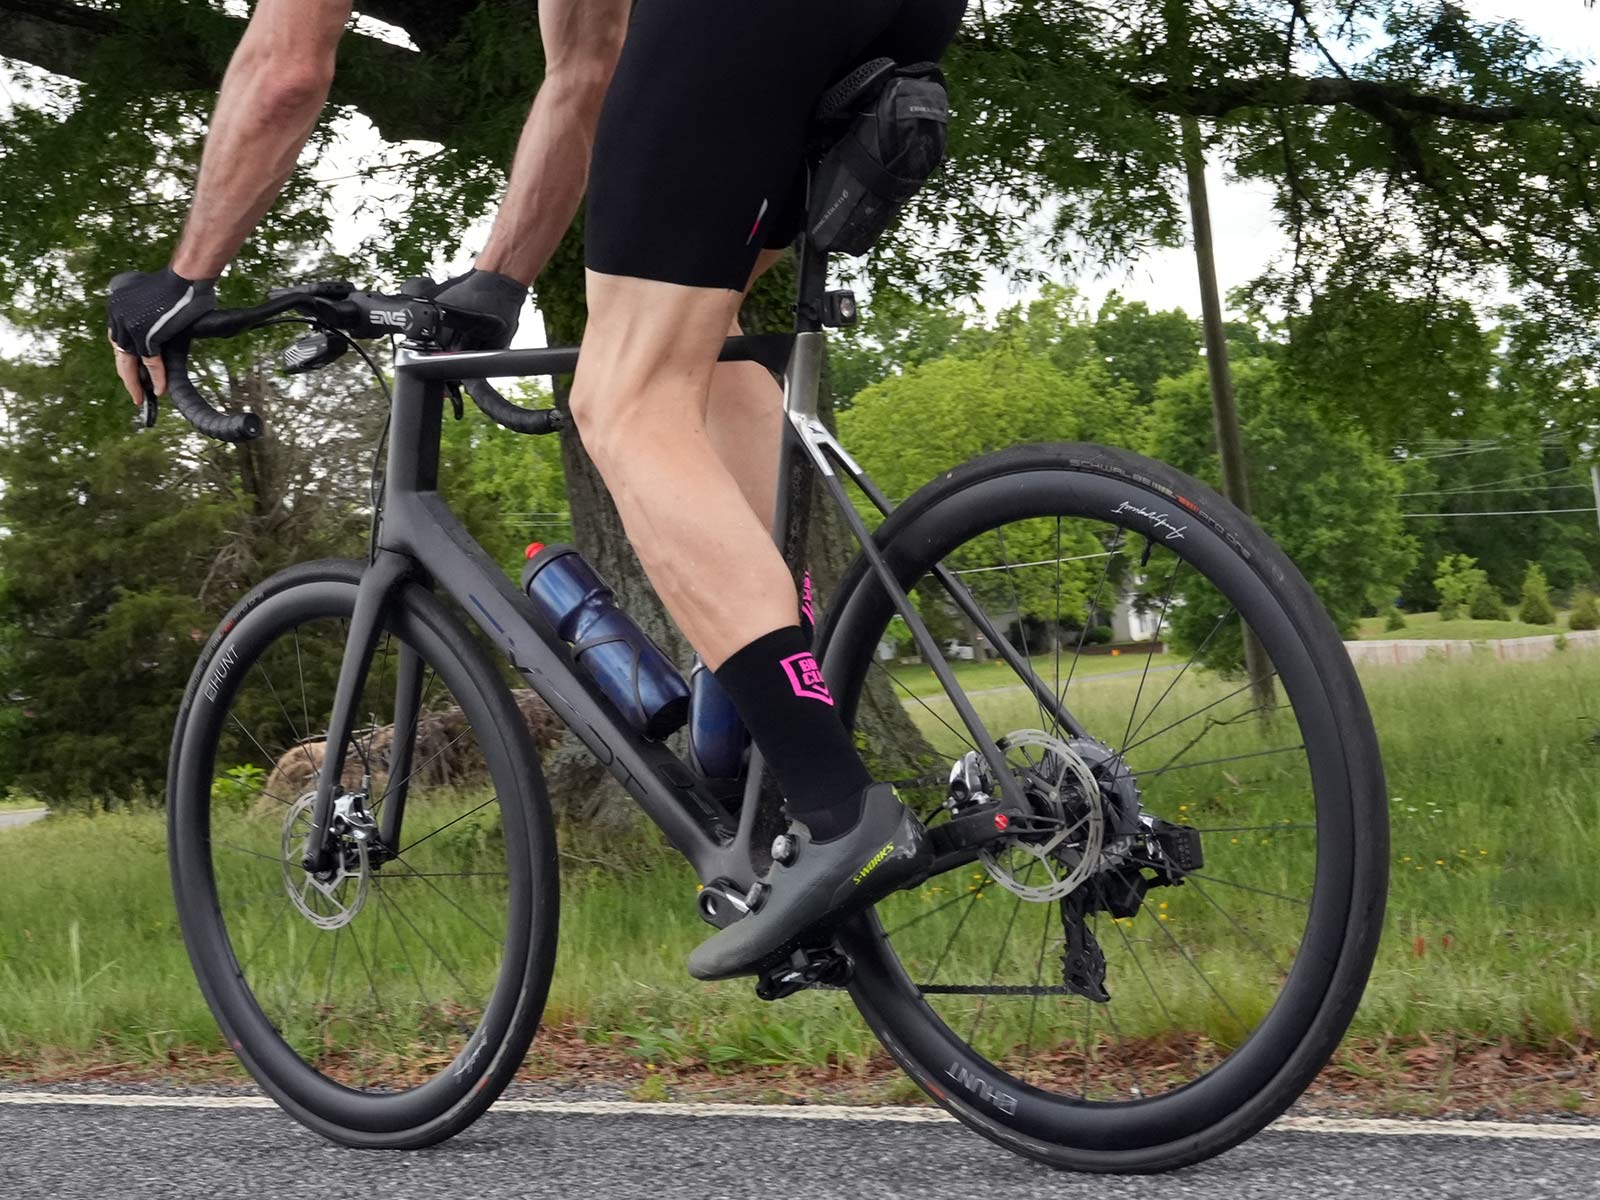 Review: Specialized S-Works Torch road shoes live up to the hype